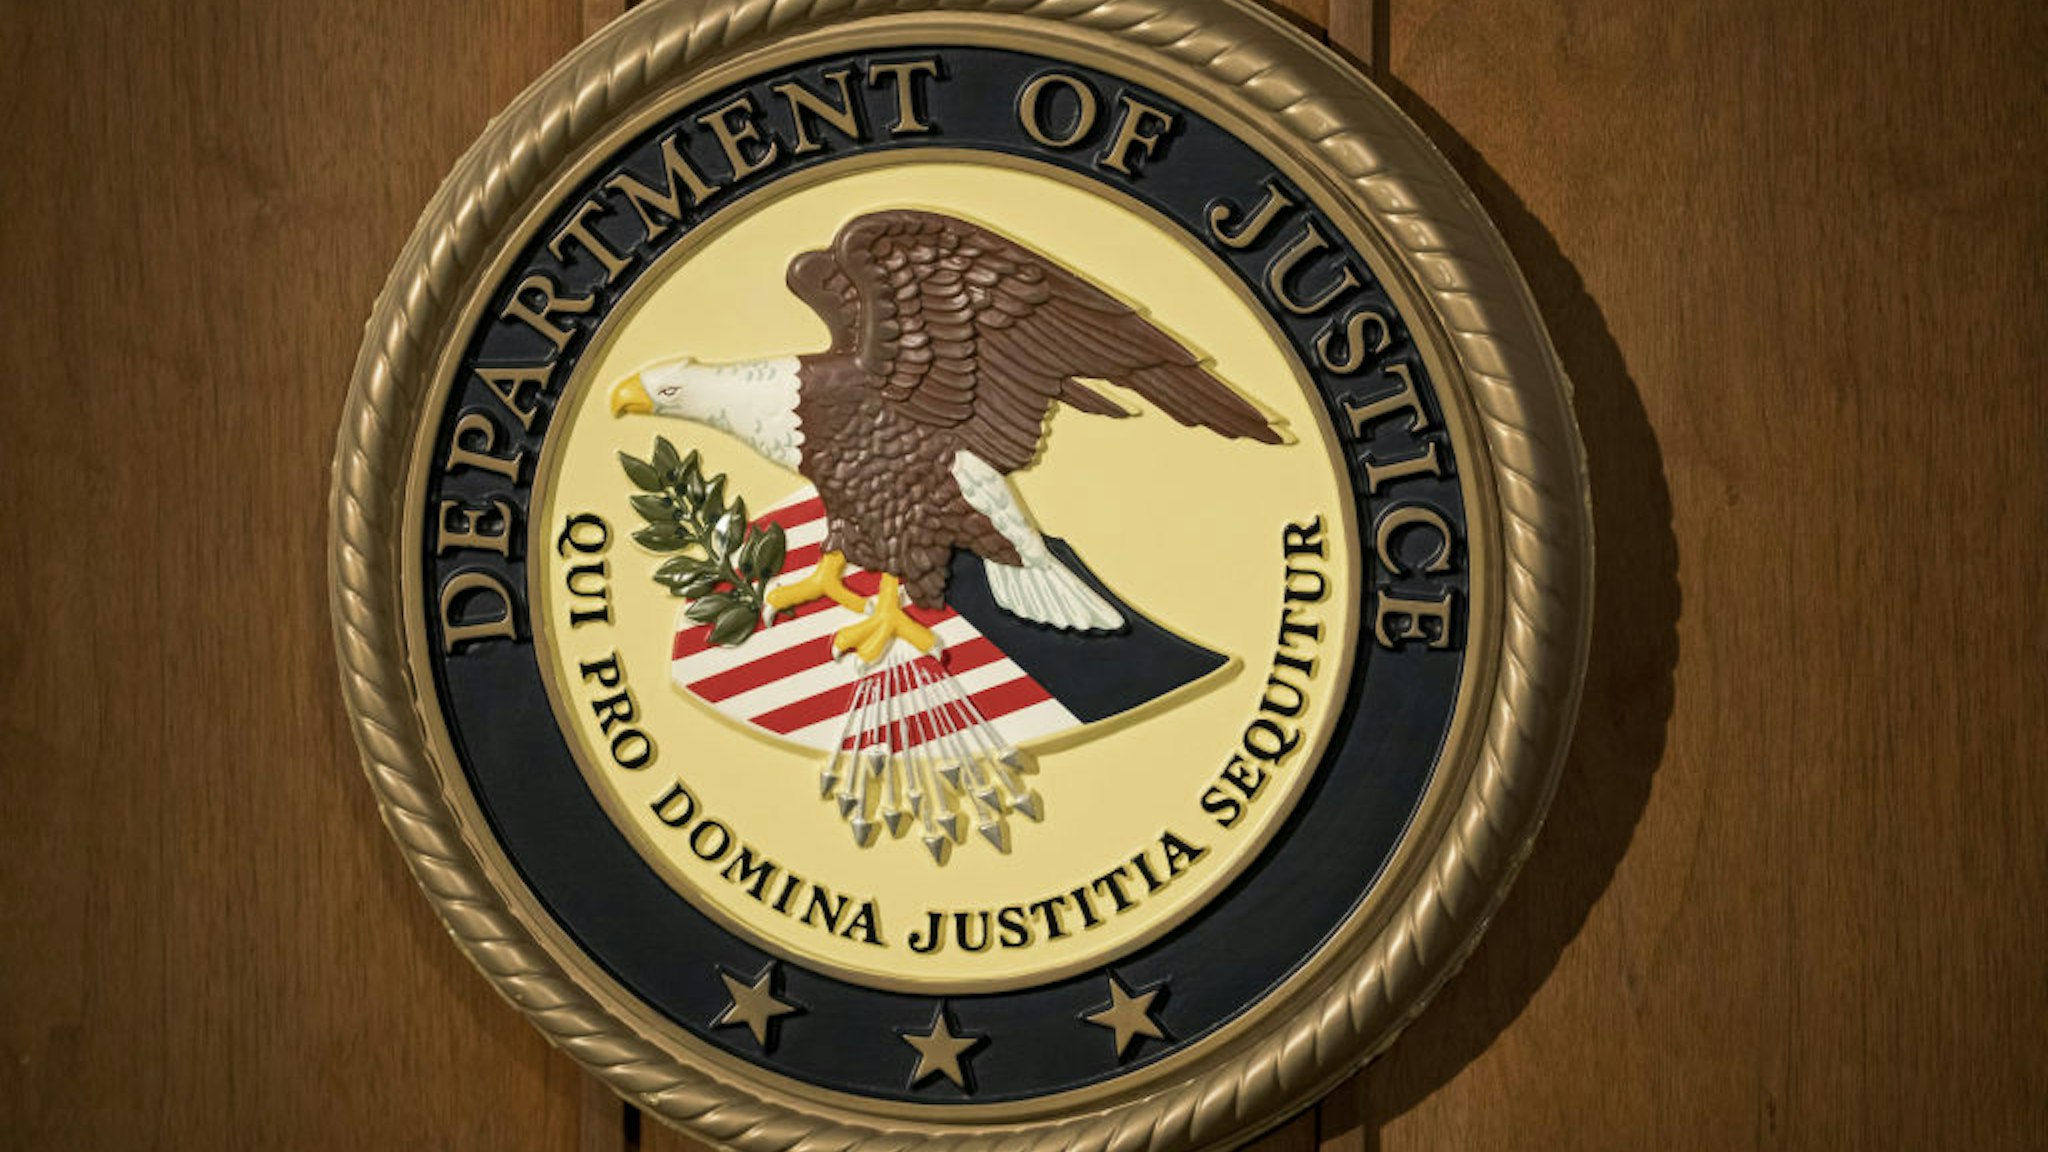 The U.S. Department of Justice seal is displayed on a podium during a news conference at the U.S. Attorney's Office in New York, U.S., on Thursday, July 2, 2020. Ghislaine Maxwell, a longtime associate of disgraced money manager Jeffrey Epstein, was arrested and charged with conspiracy and enticing minors to engage in sex.